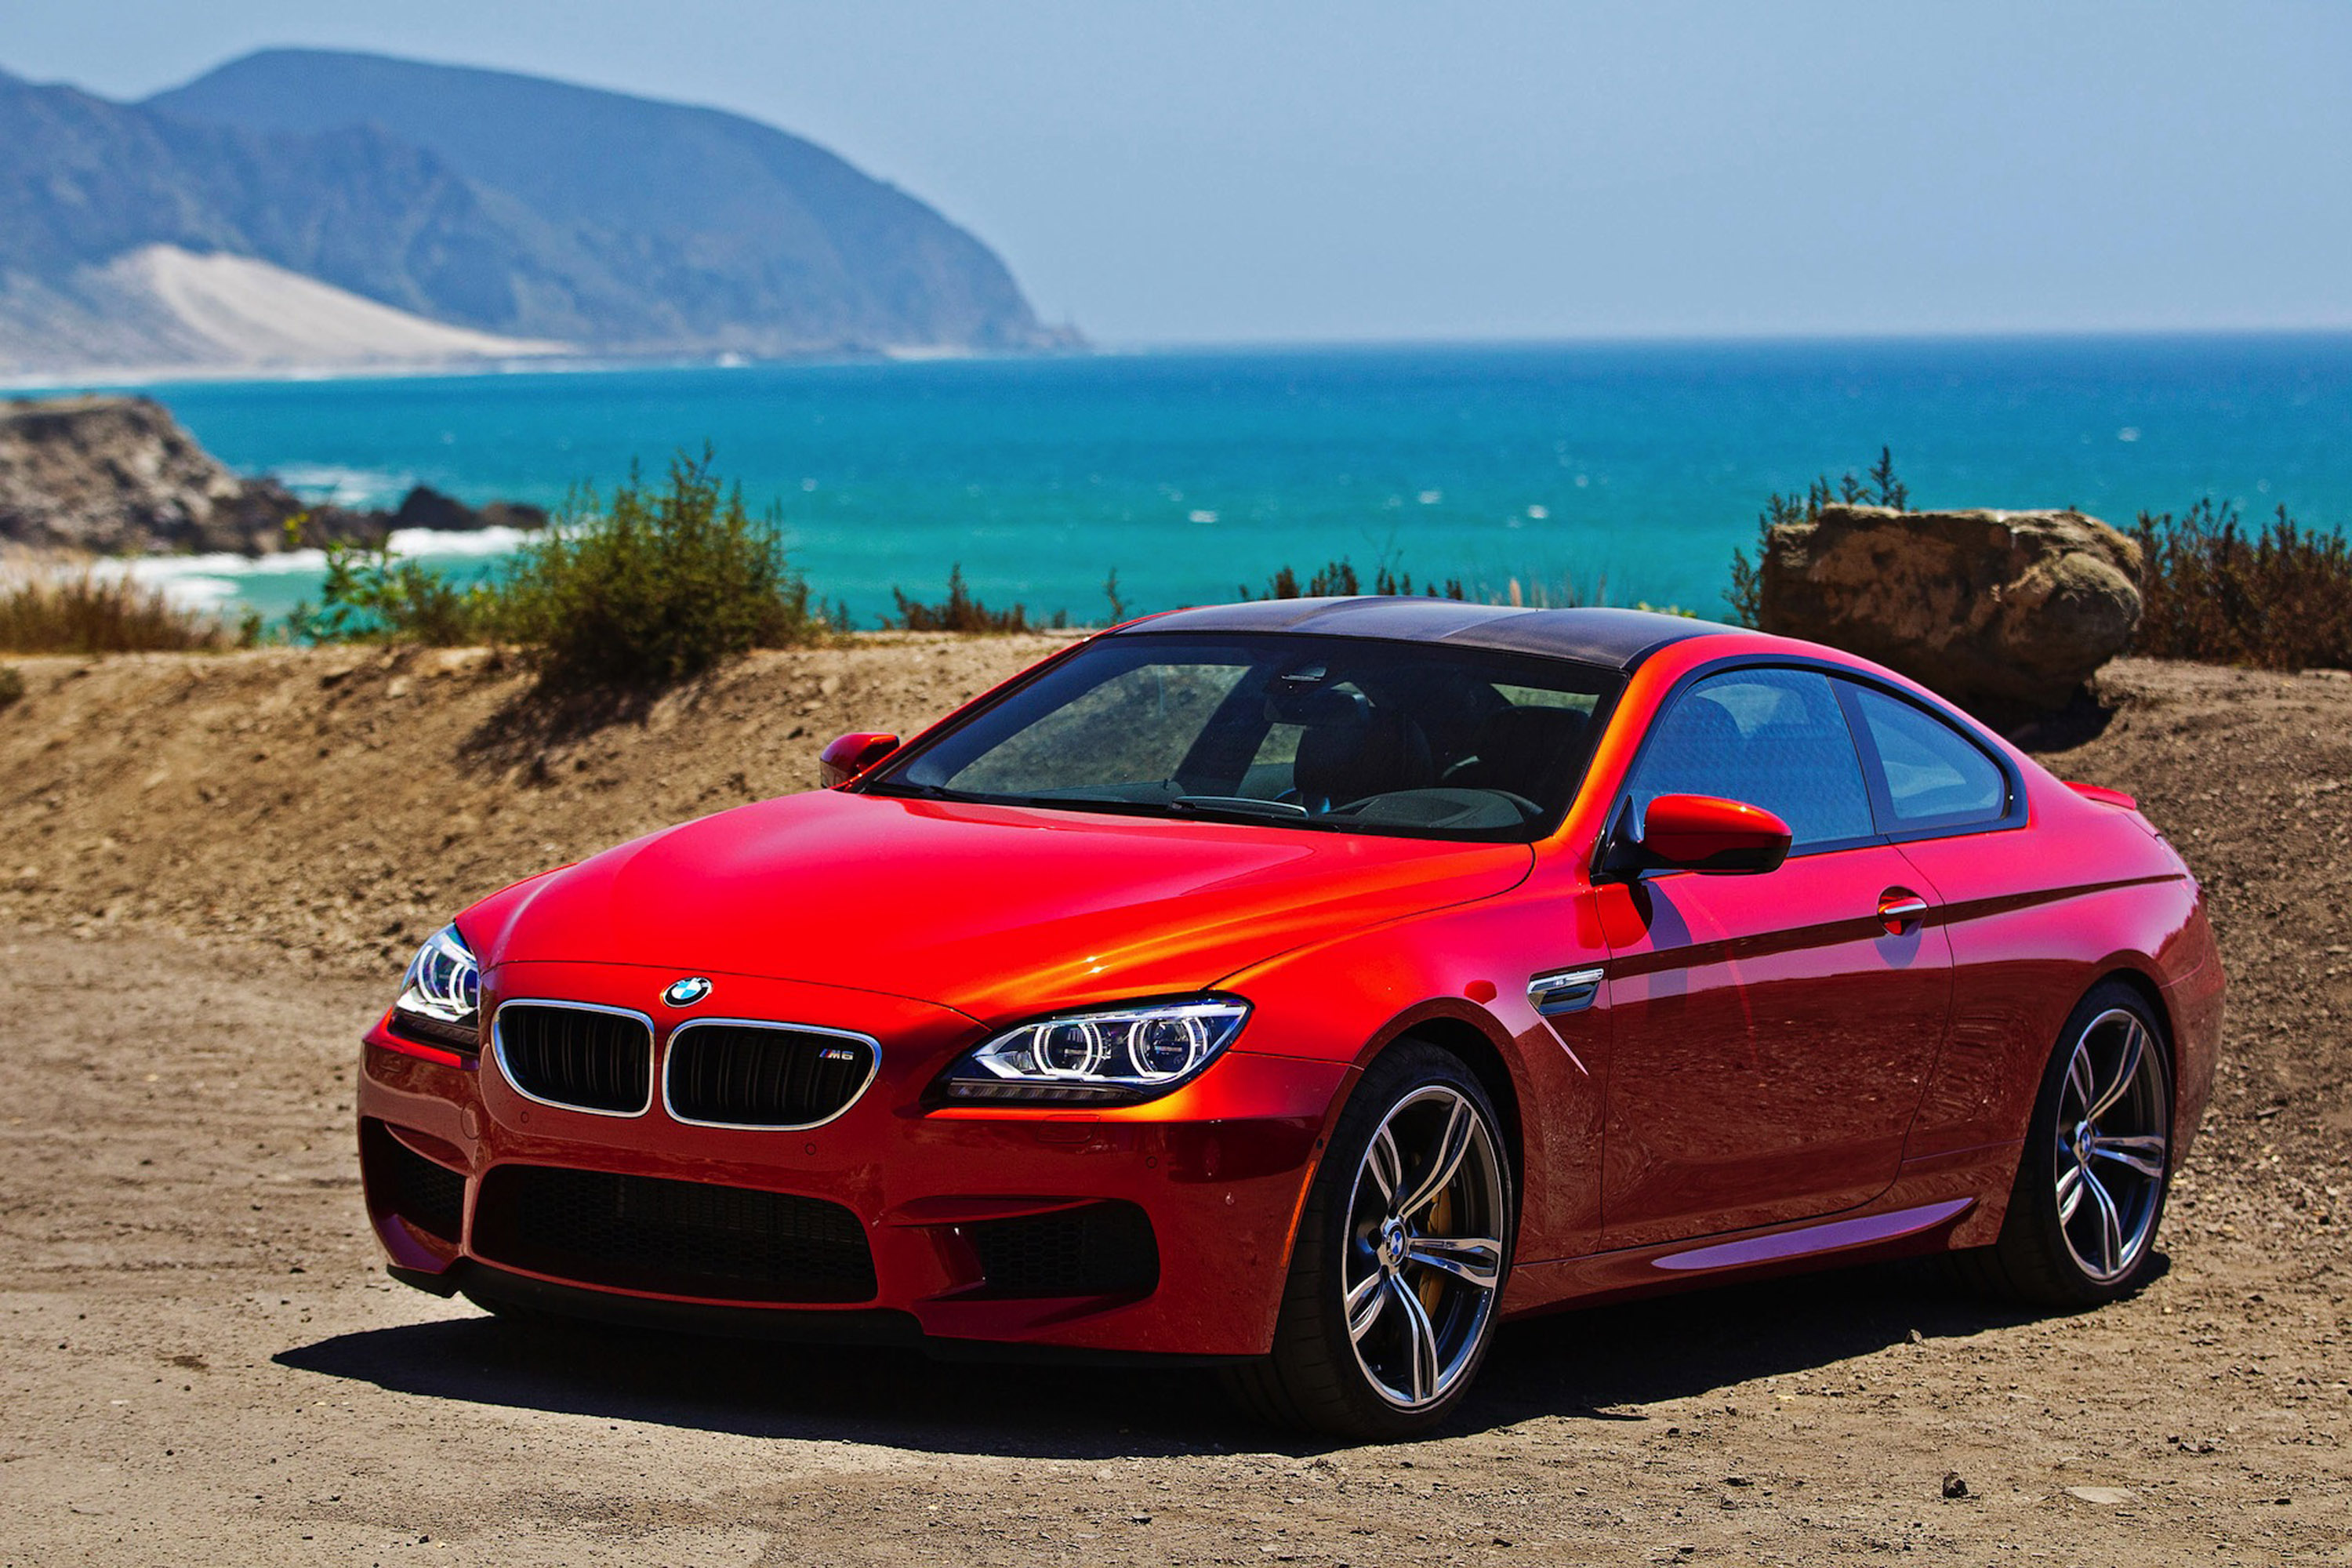 Bmw 6 m. BMW m6 Coupe. BMW m6 Coupe 2013. BMW m6 Coupe 2012. BMW m6 f13 Coupe.